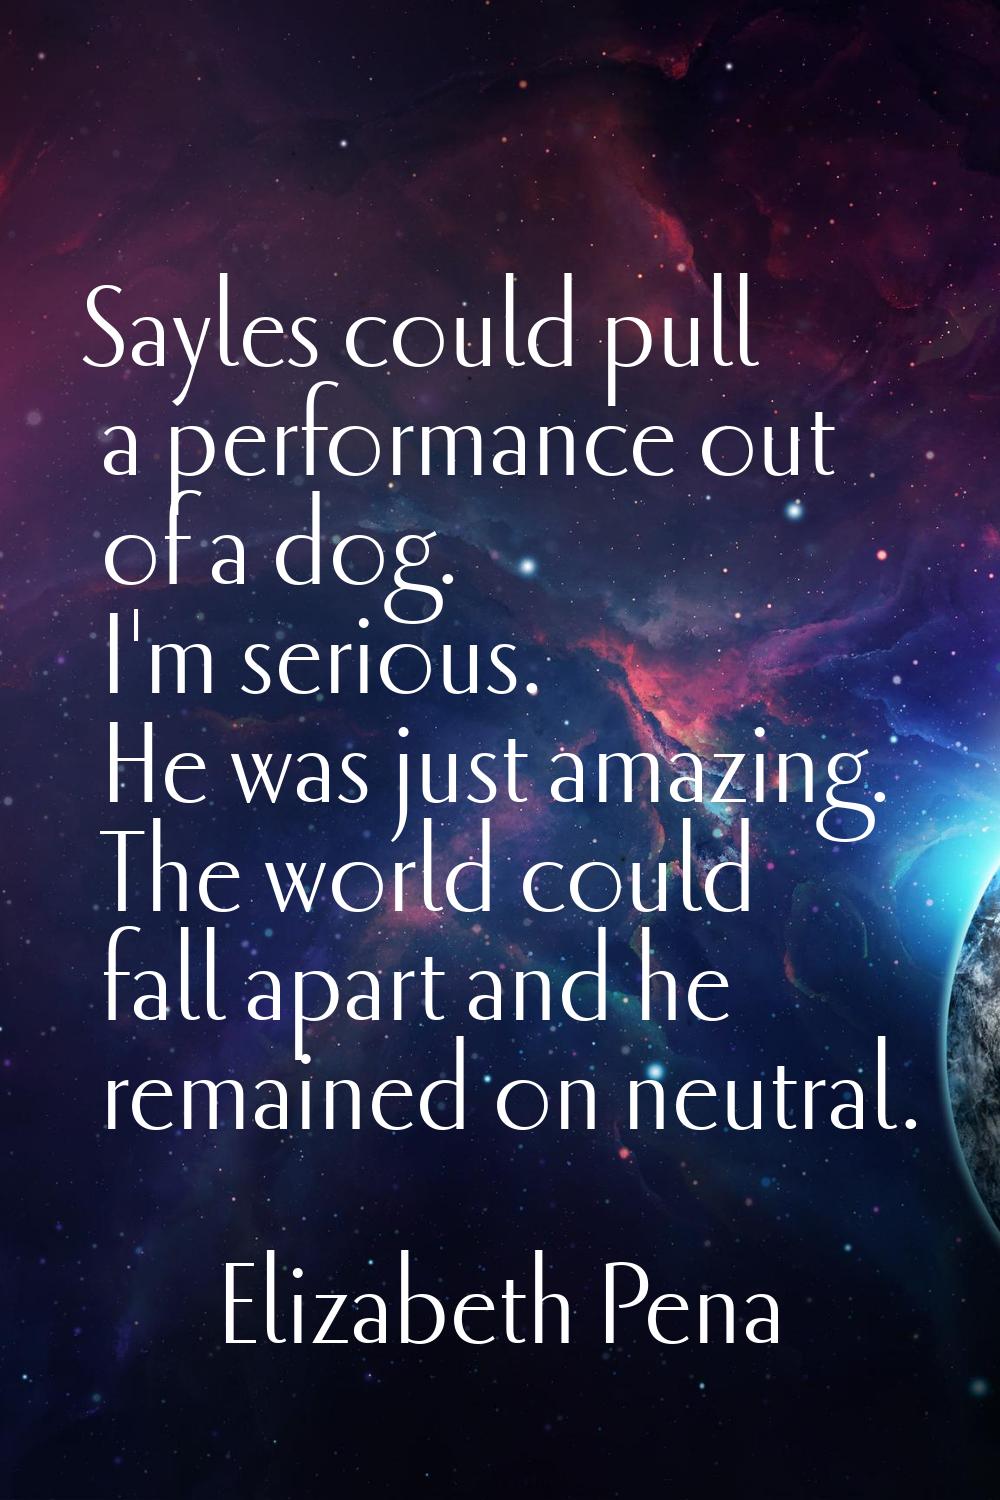 Sayles could pull a performance out of a dog. I'm serious. He was just amazing. The world could fal